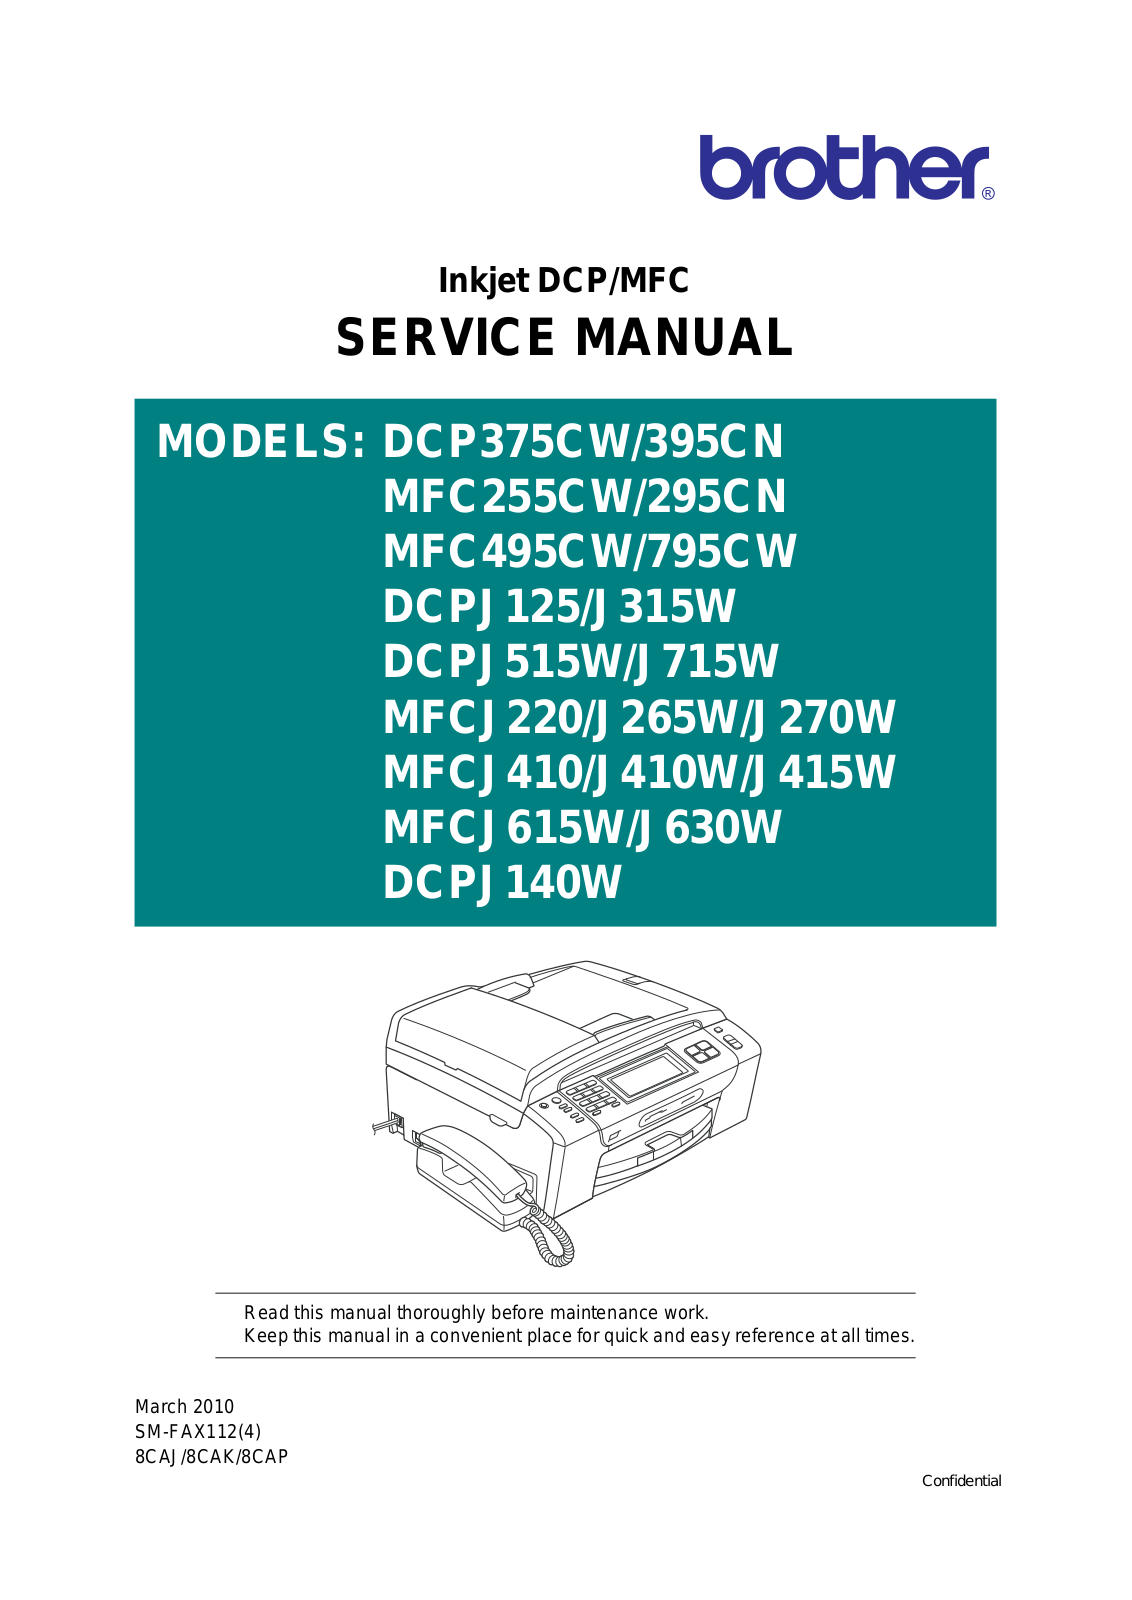 Brother dcp 375cw, dcp 395cn, MFC 255cw, MFC 295cn, MFC 495cw Service Manual